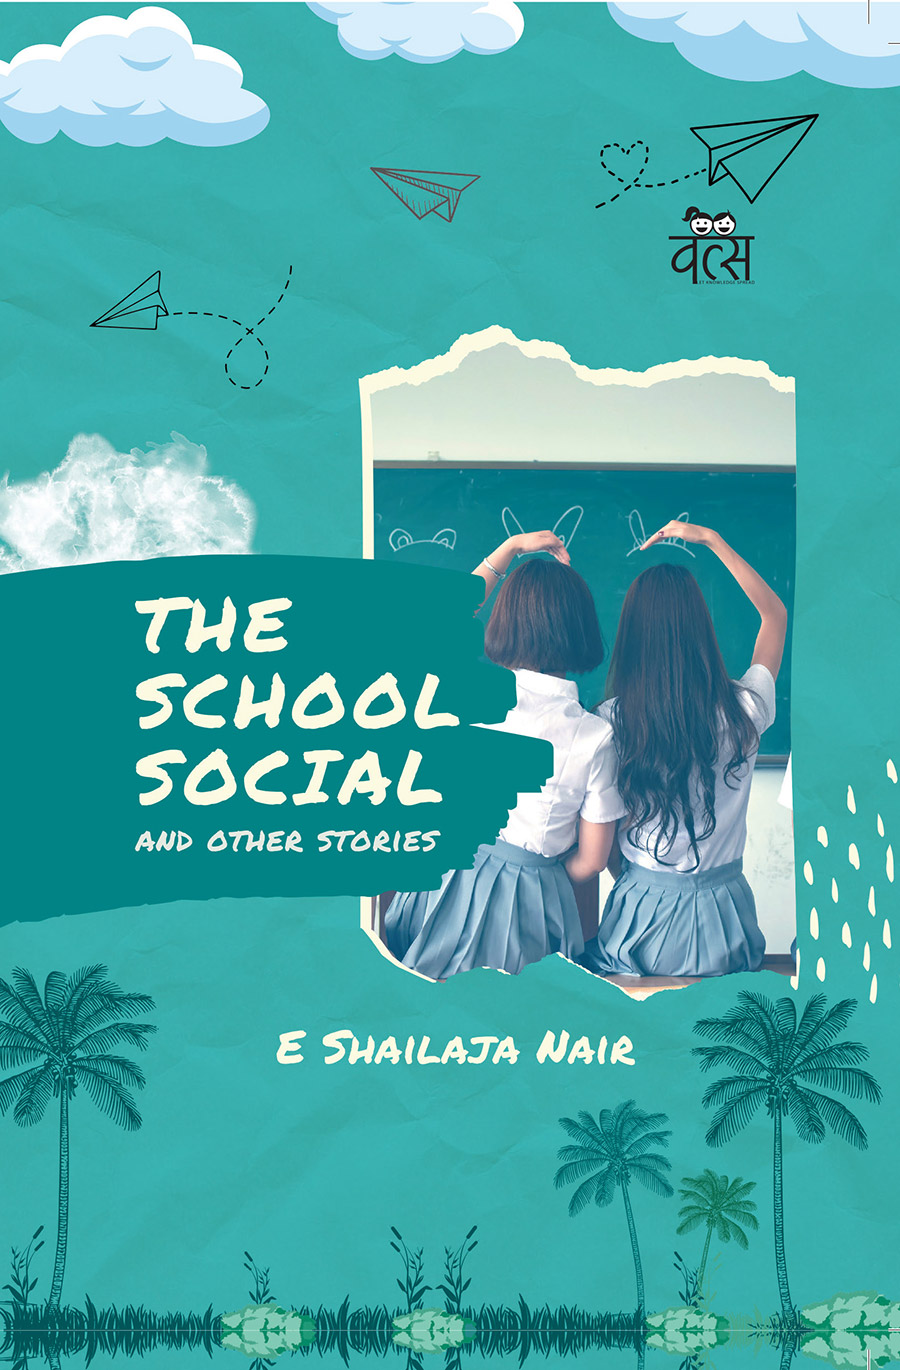 The School Social and other stories